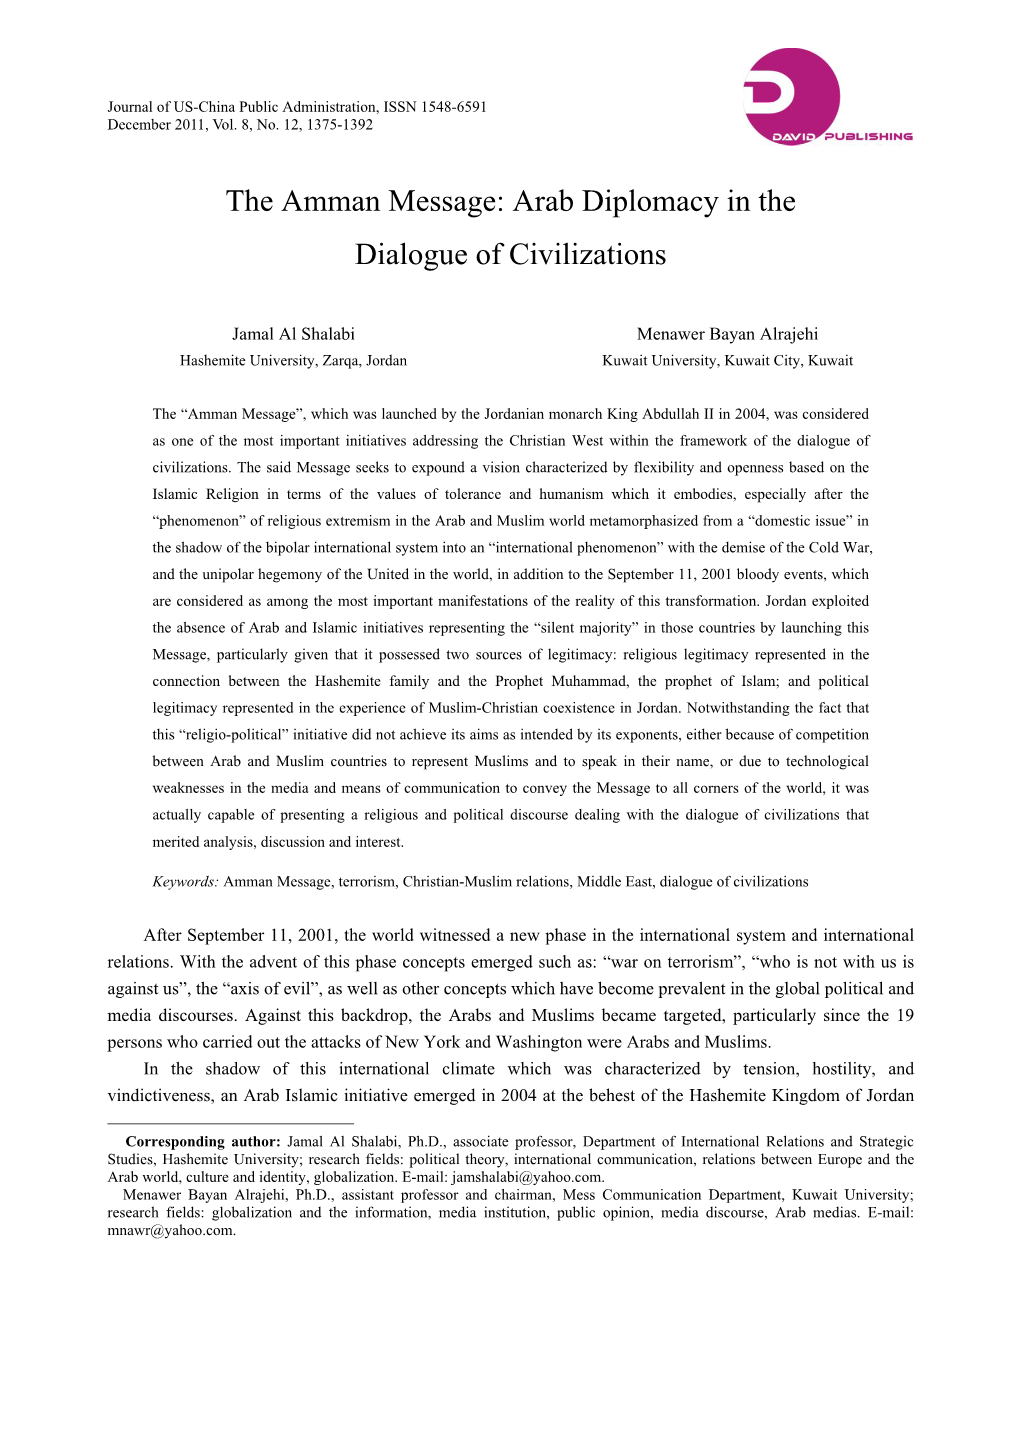 The Amman Message: Arab Diplomacy in the Dialogue of Civilizations